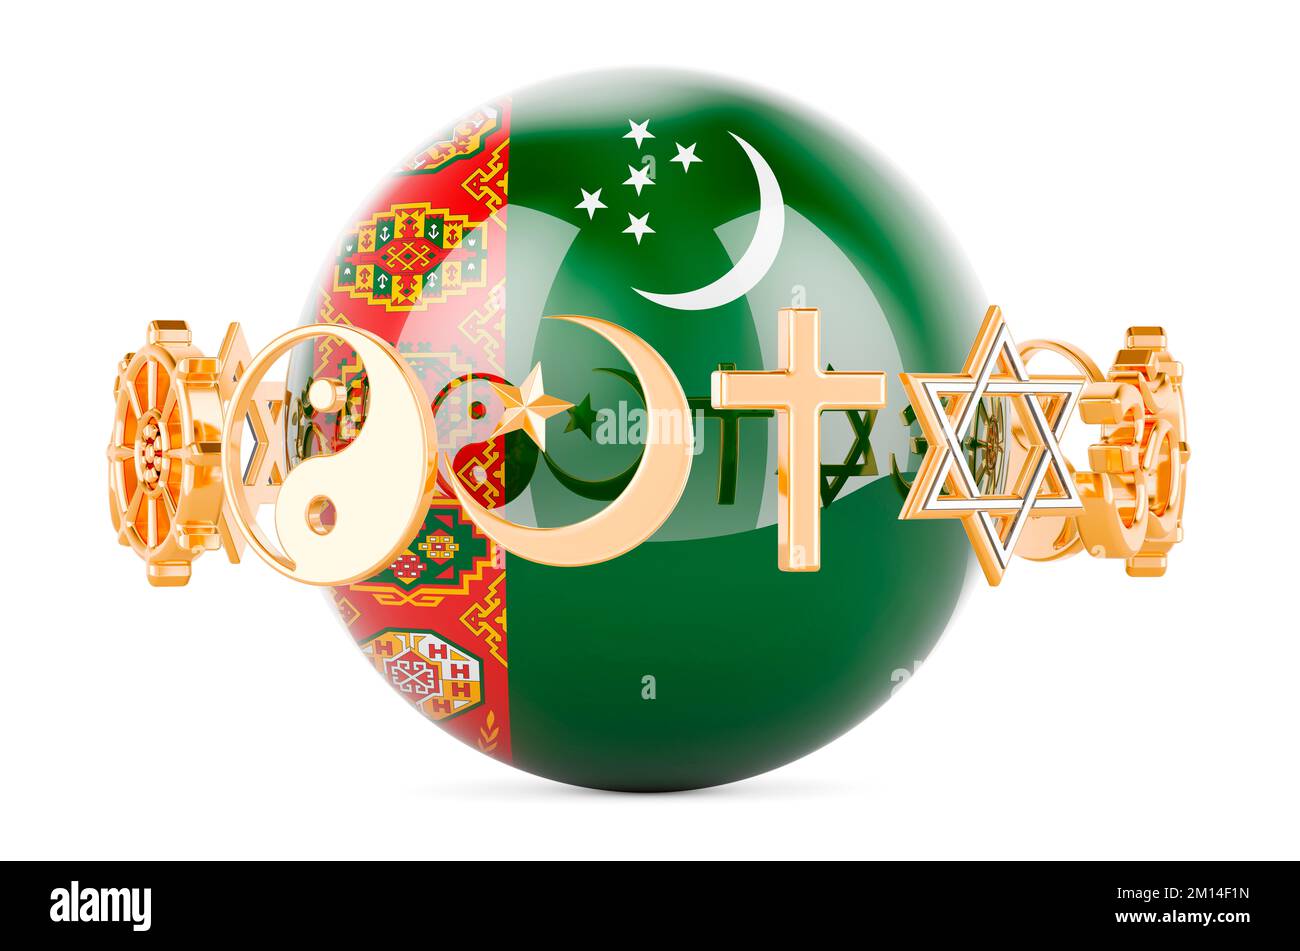 Turkmen flag painted on sphere with religions symbols around, 3D rendering isolated on white background Stock Photo